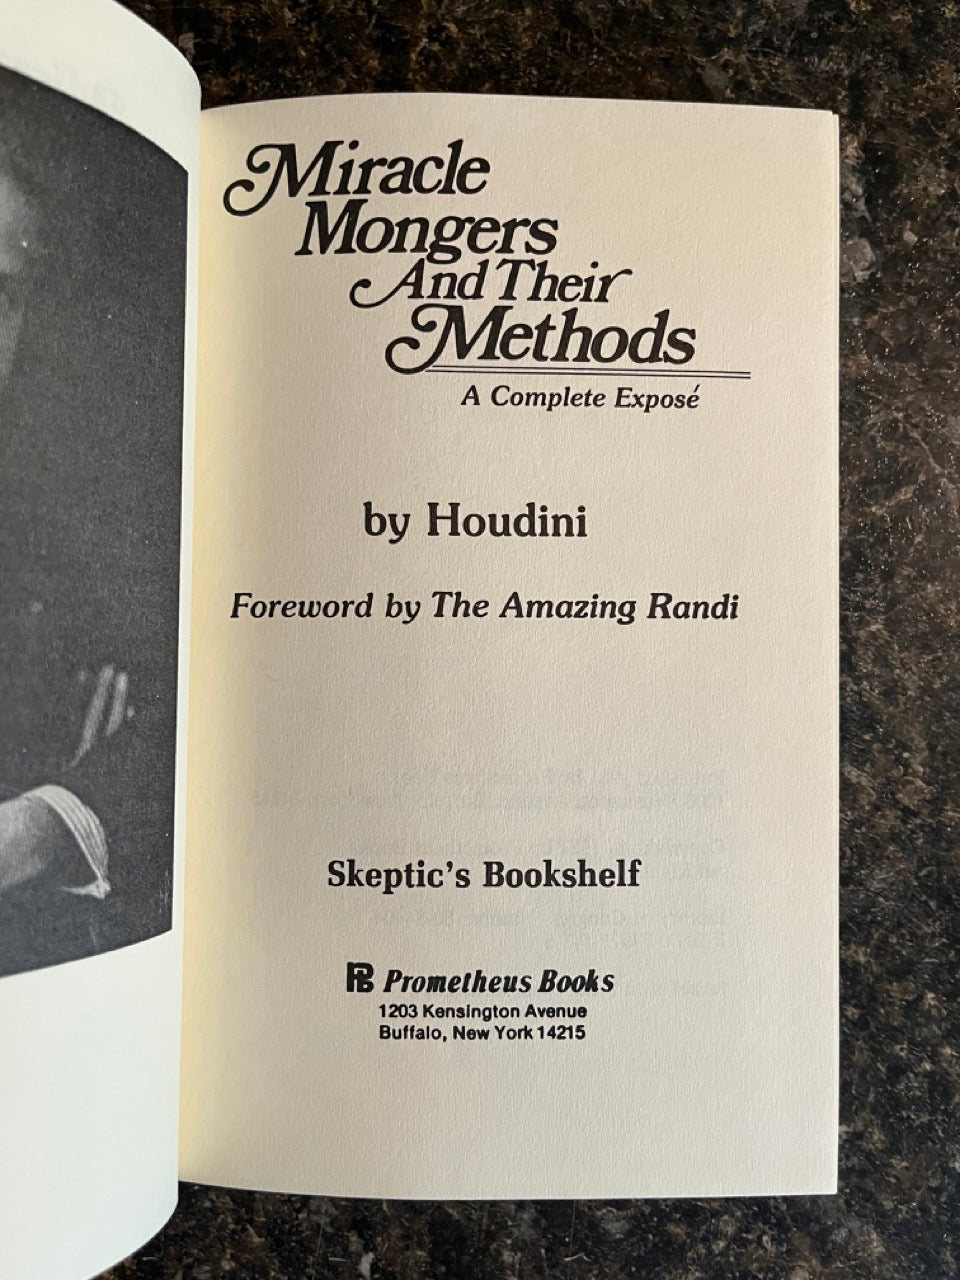 Miracle Mongers And Their Methods - Harry Houdini